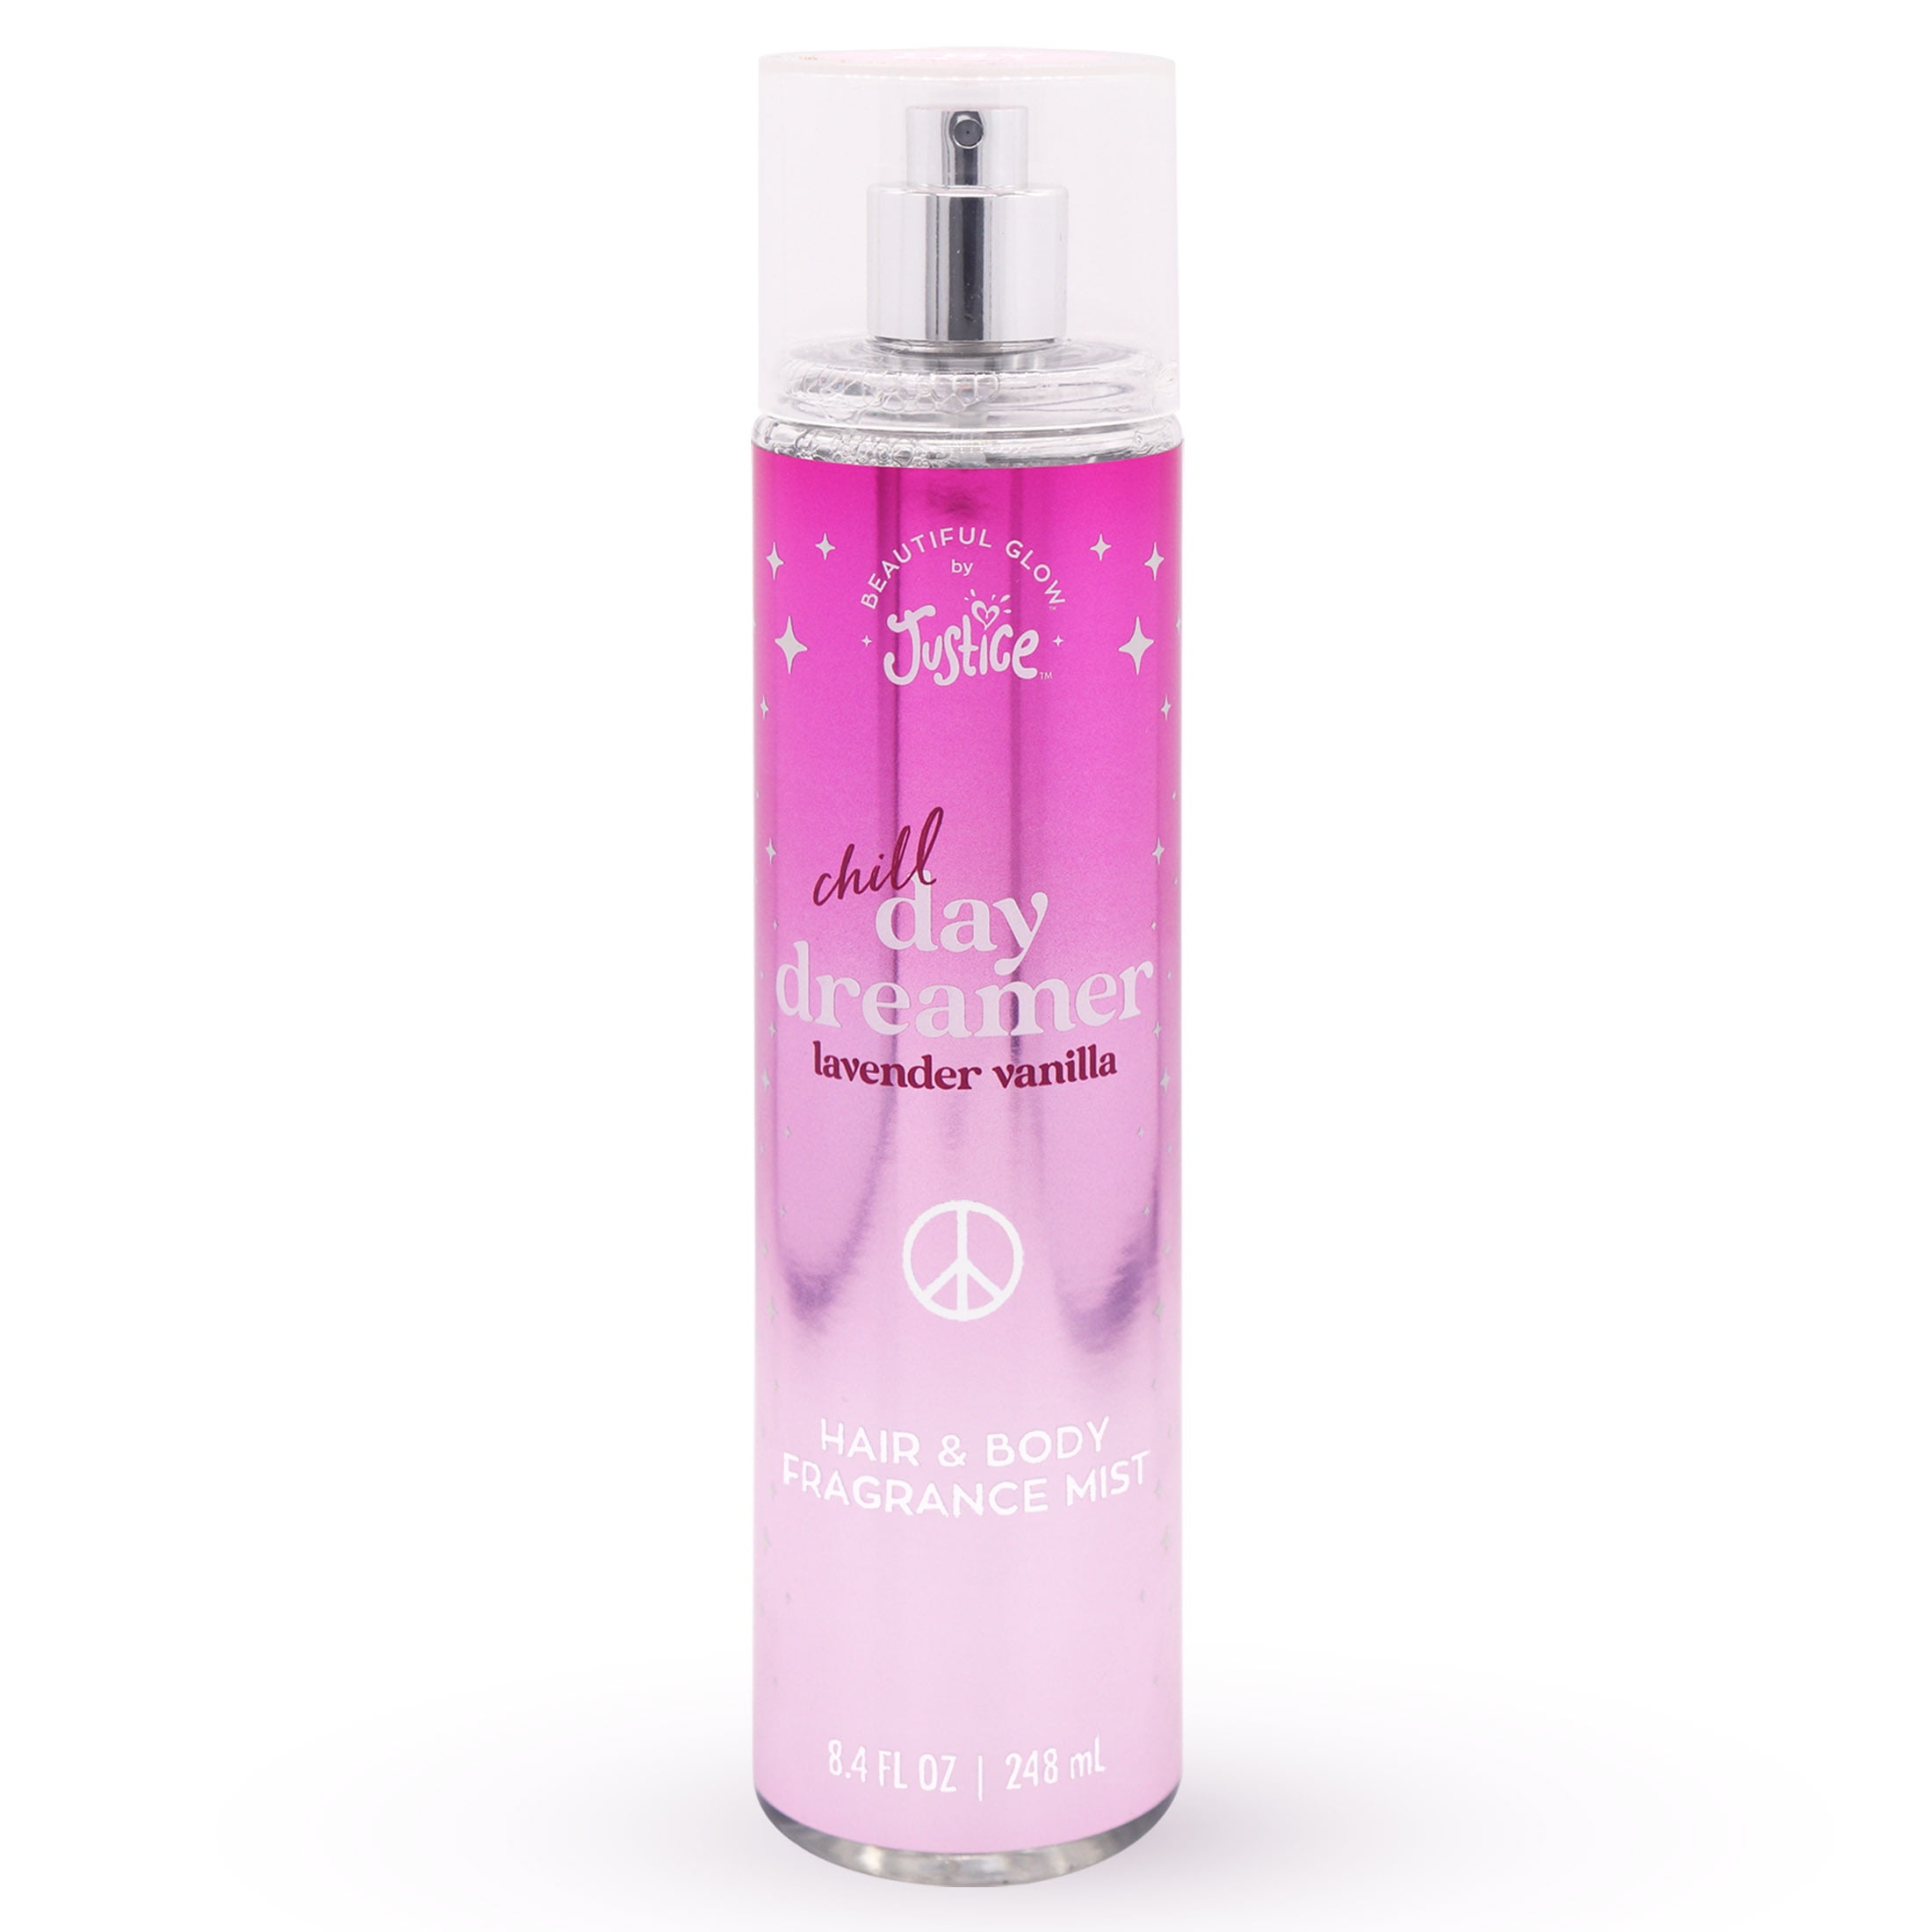 Beautiful Glow by Justice Hair and Body Fragrance Mist, Chill Day Dreamer  Lav Vanilla, 8.4 fl oz